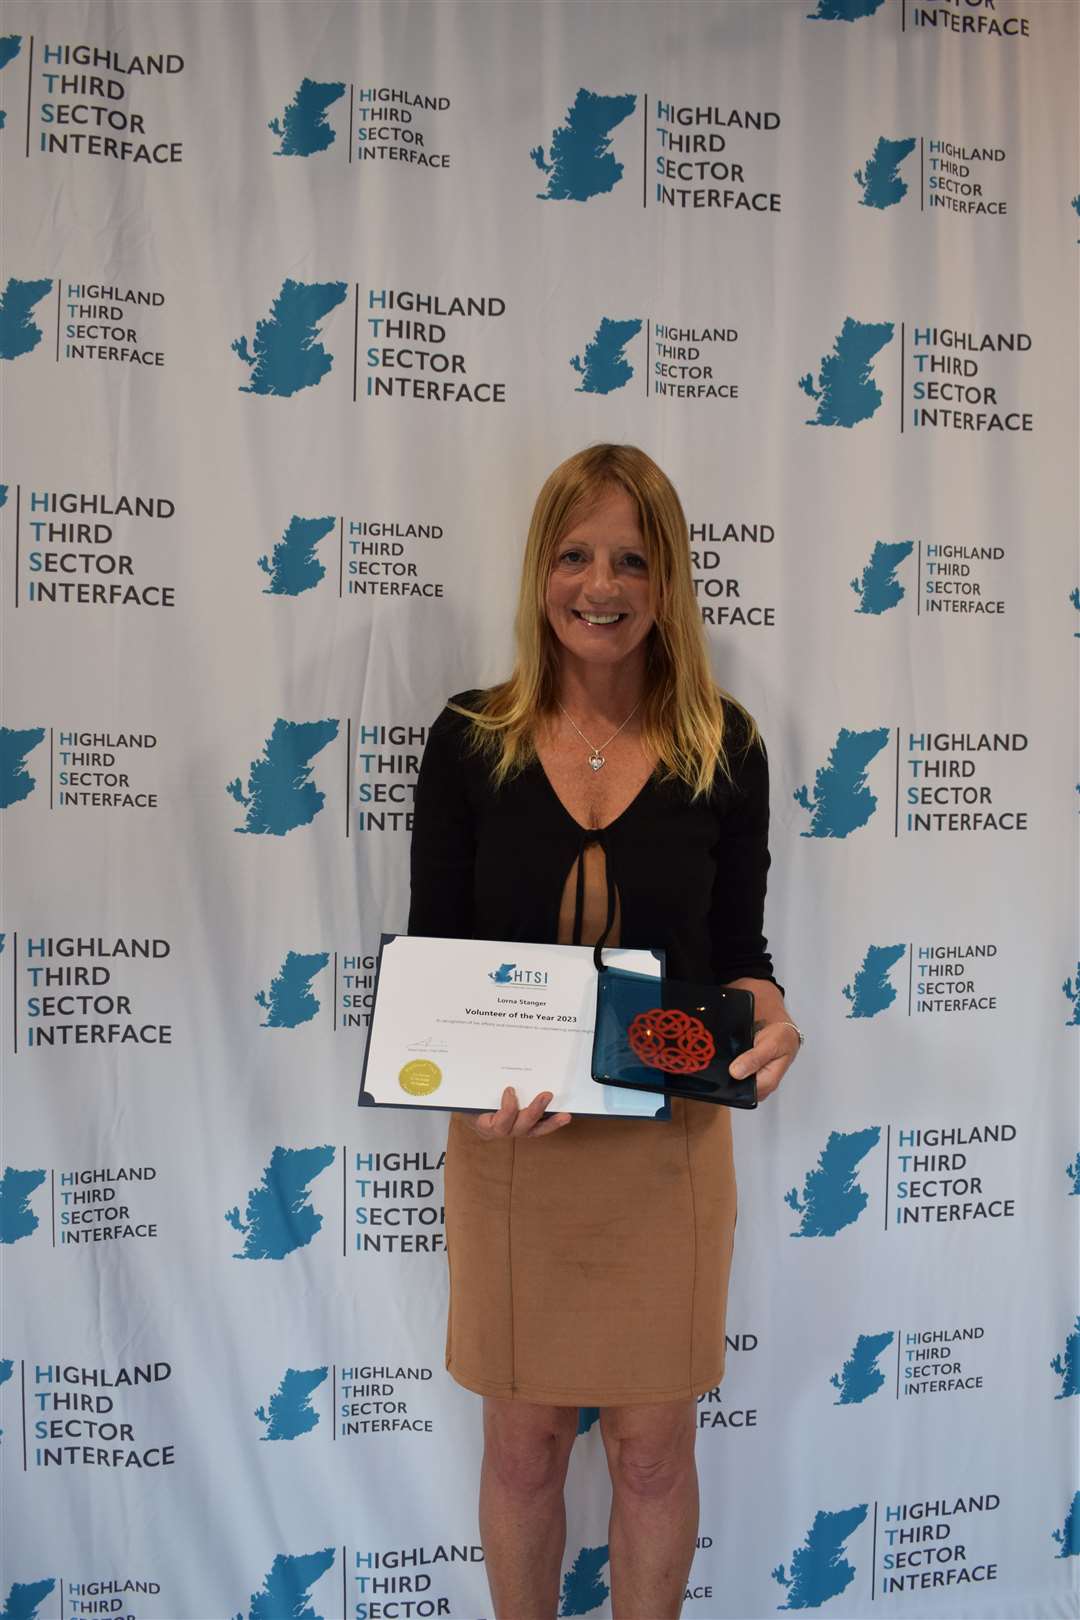 Lorna Stanger picked up an award for volunteer of the year at the Highland Third Sector Interface awards.